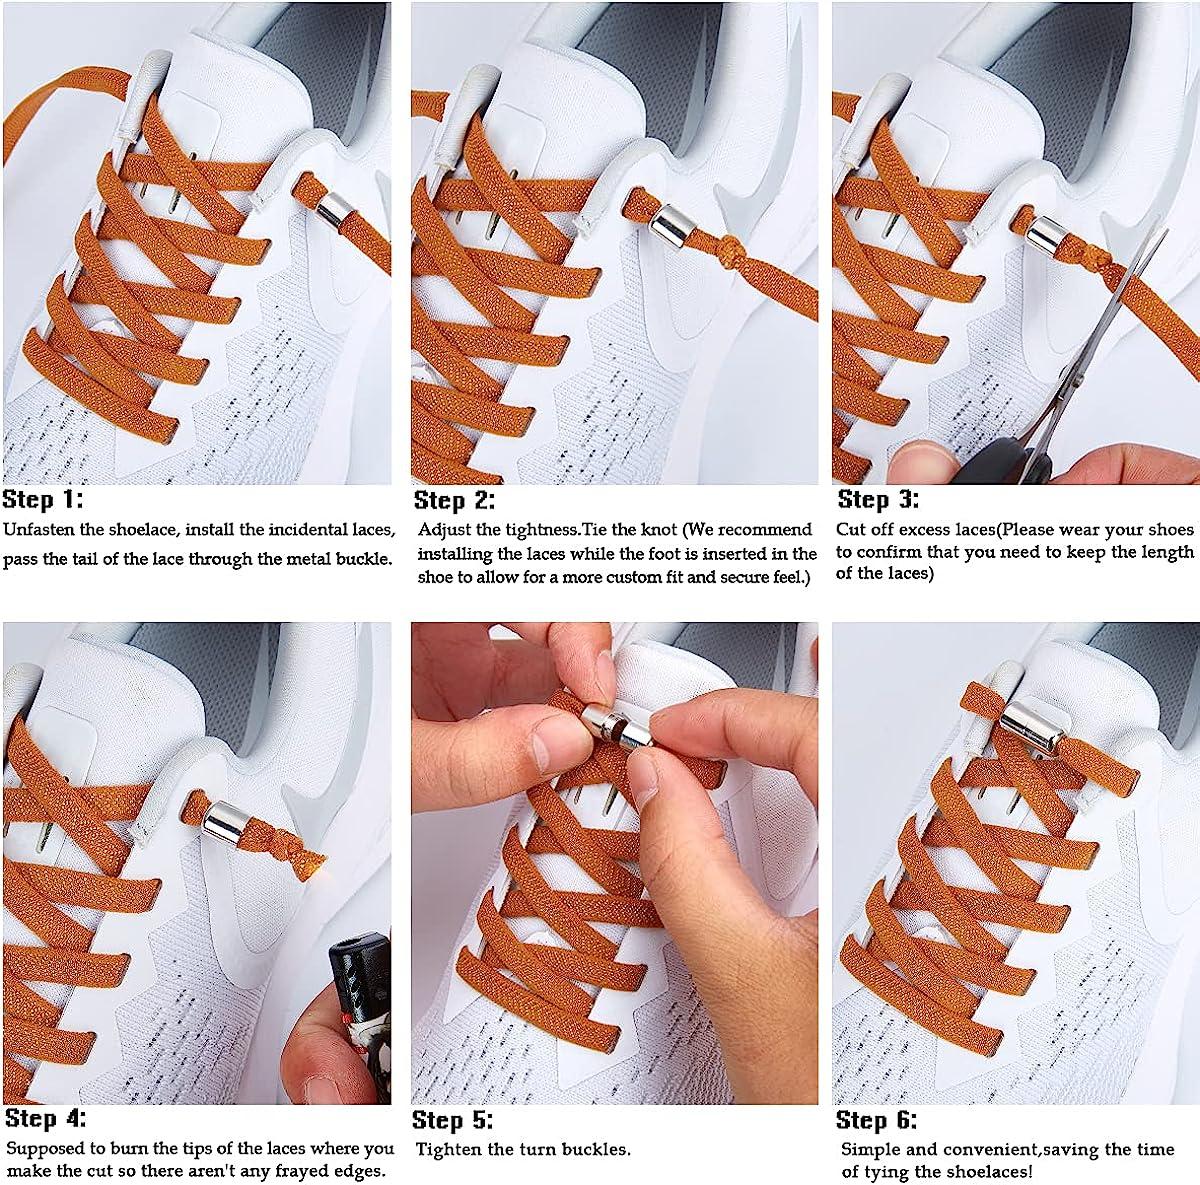 No Tie Elastic Shoelaces With Magnetic Shoe Laces Lock – Space Saving For  Home